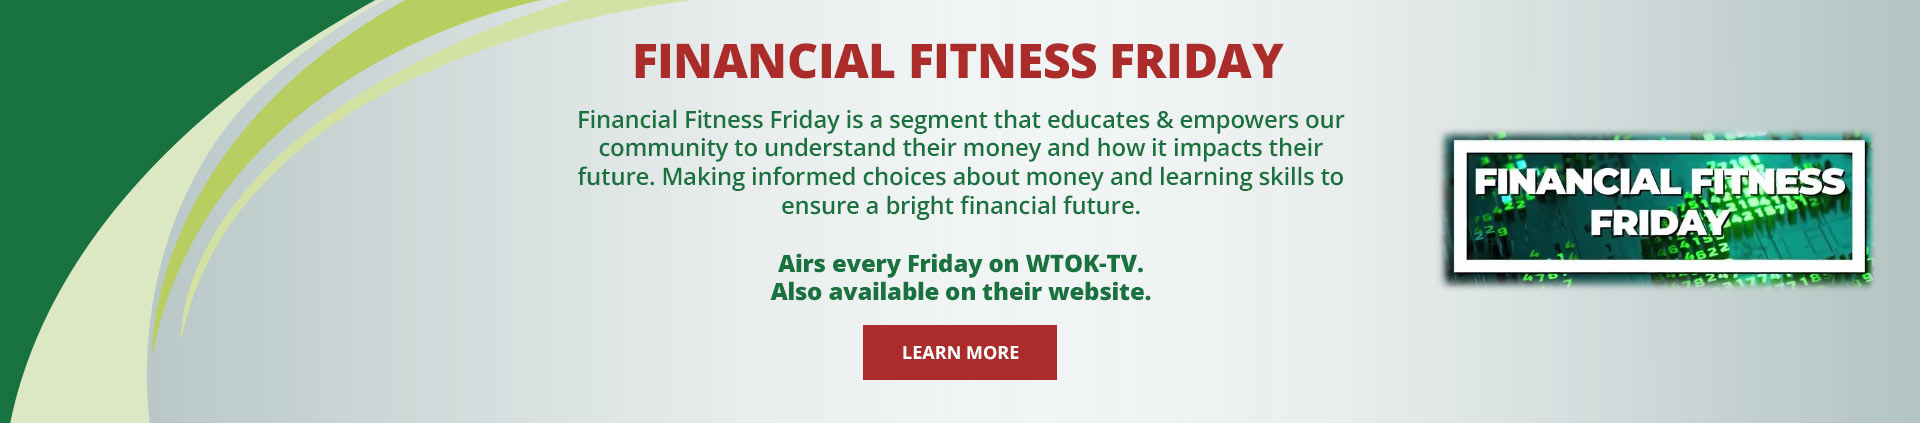 Financial Fitness Friday is a segment that educates & empowers our community to understand their money and how it impacts their future. Making informed choices about money and learning skills to ensure a bright financial future.